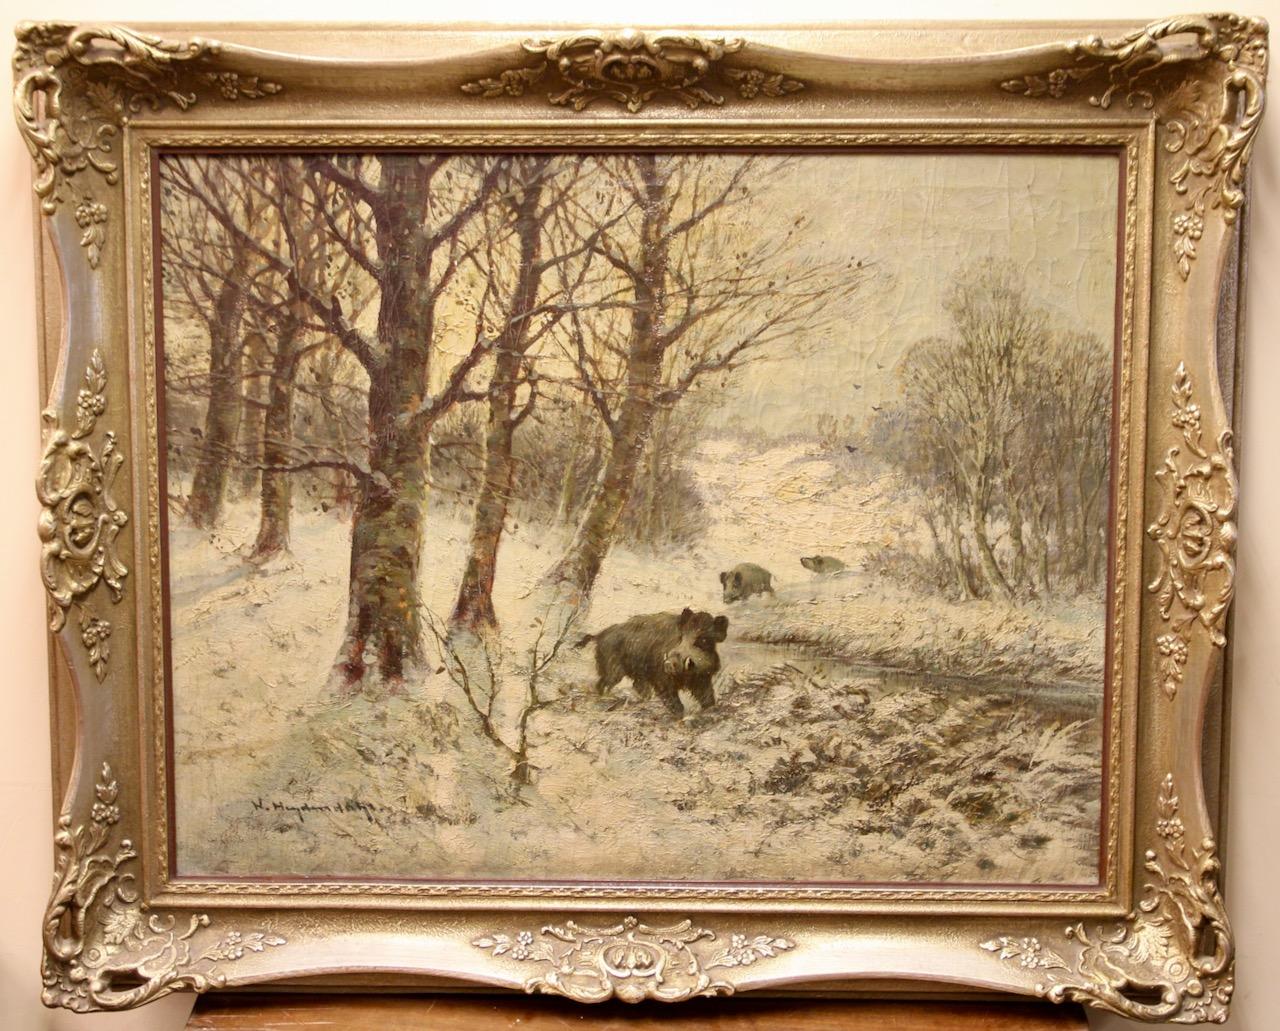 Winter landscape with wild boars. Similar to a hunting scene. Signed lower left 